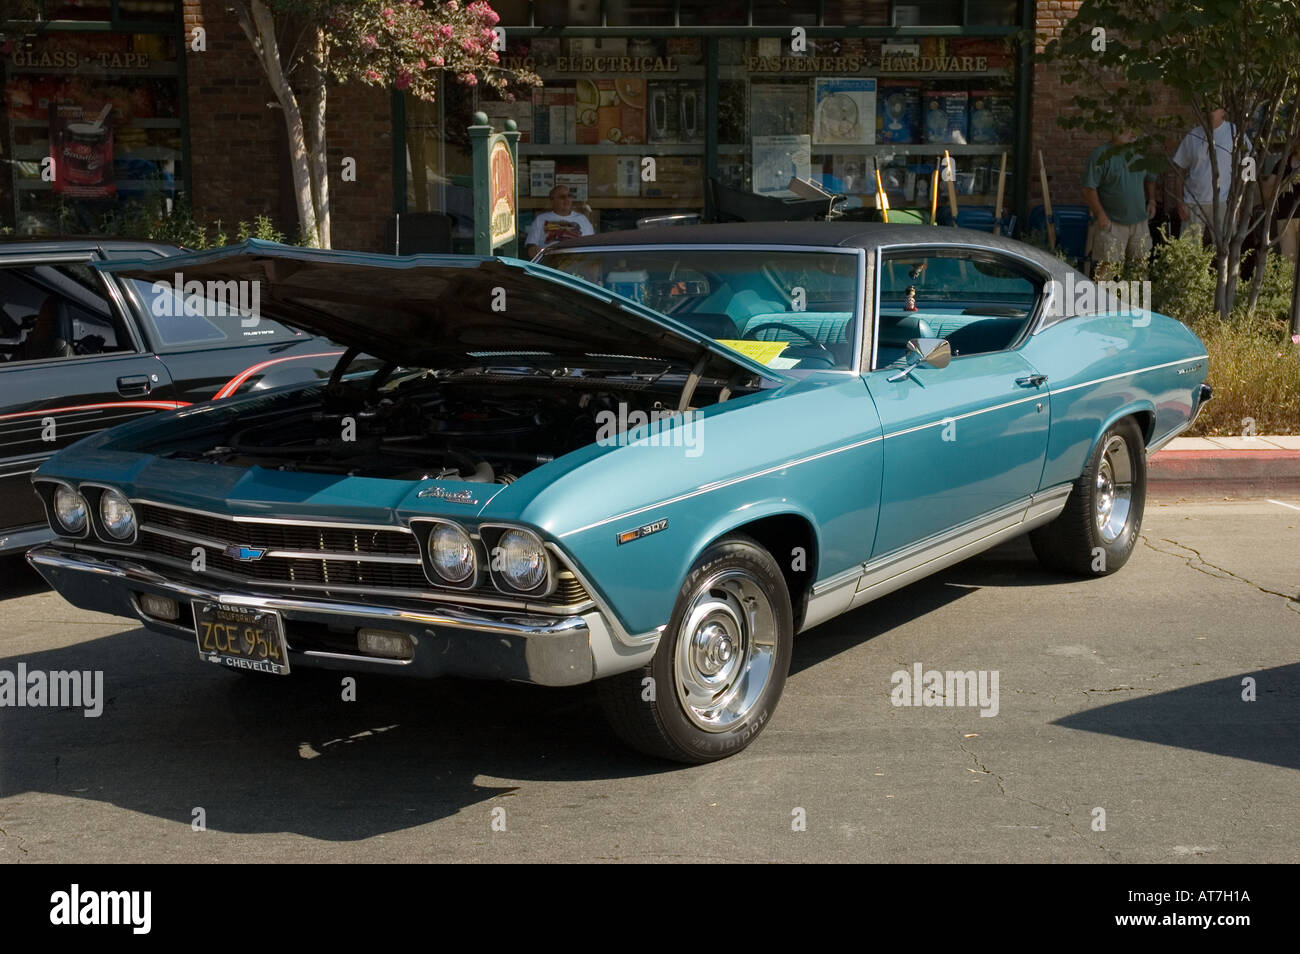 Los Angeles California car show antique customized Chevrolet Chevy Chevelle 1969 69 307 coupe 2 two door blue open hood engine Stock Photo